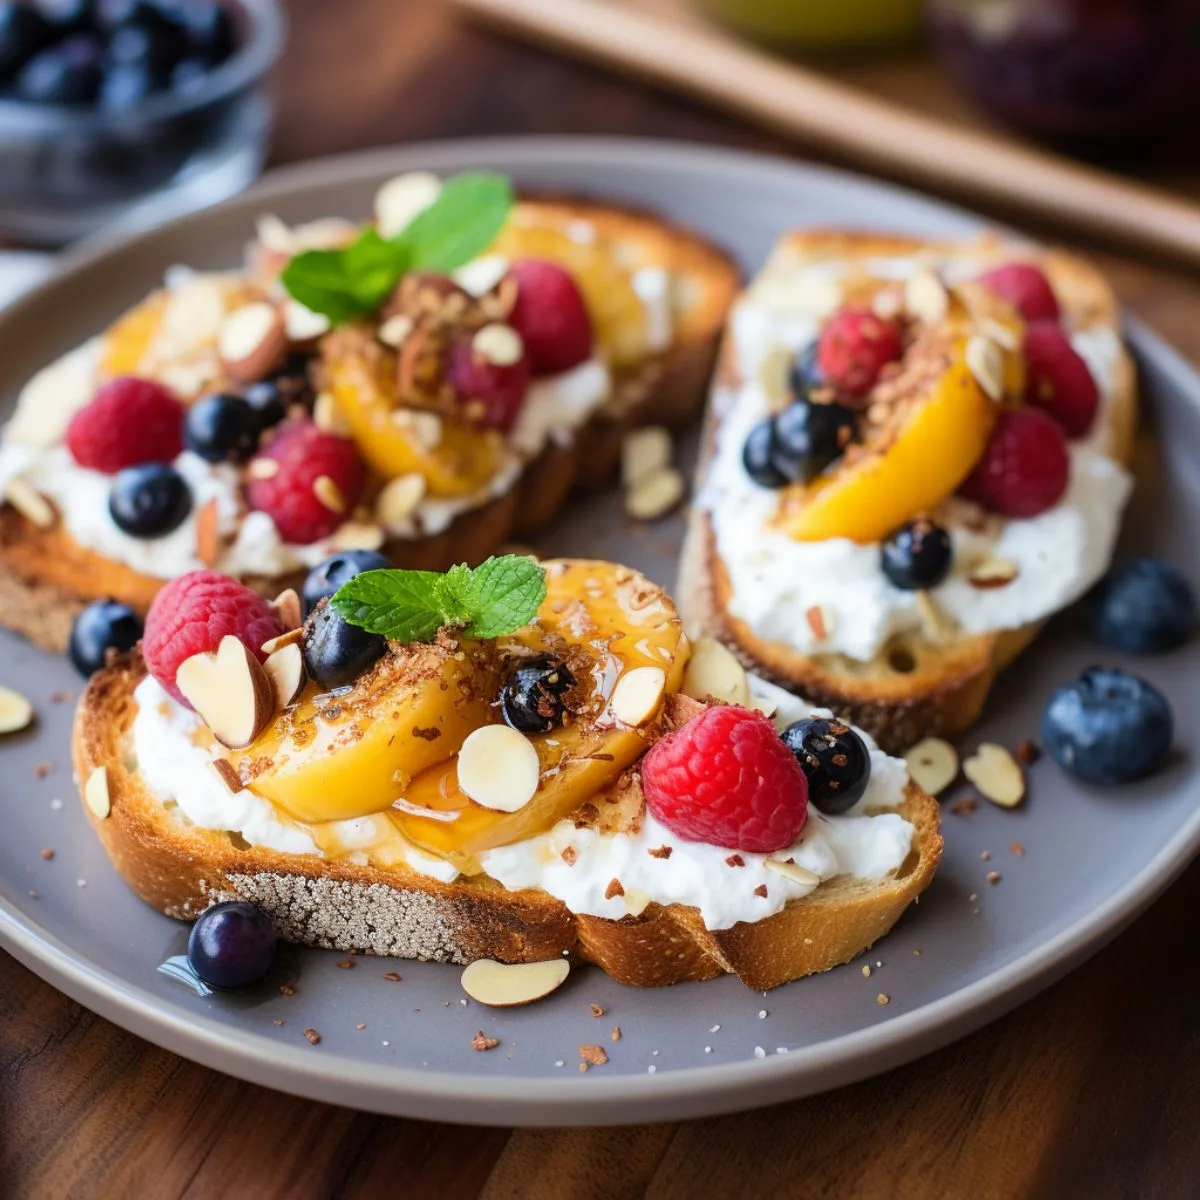 Plate of cottage cheese toasts with fruit and sweet toppings